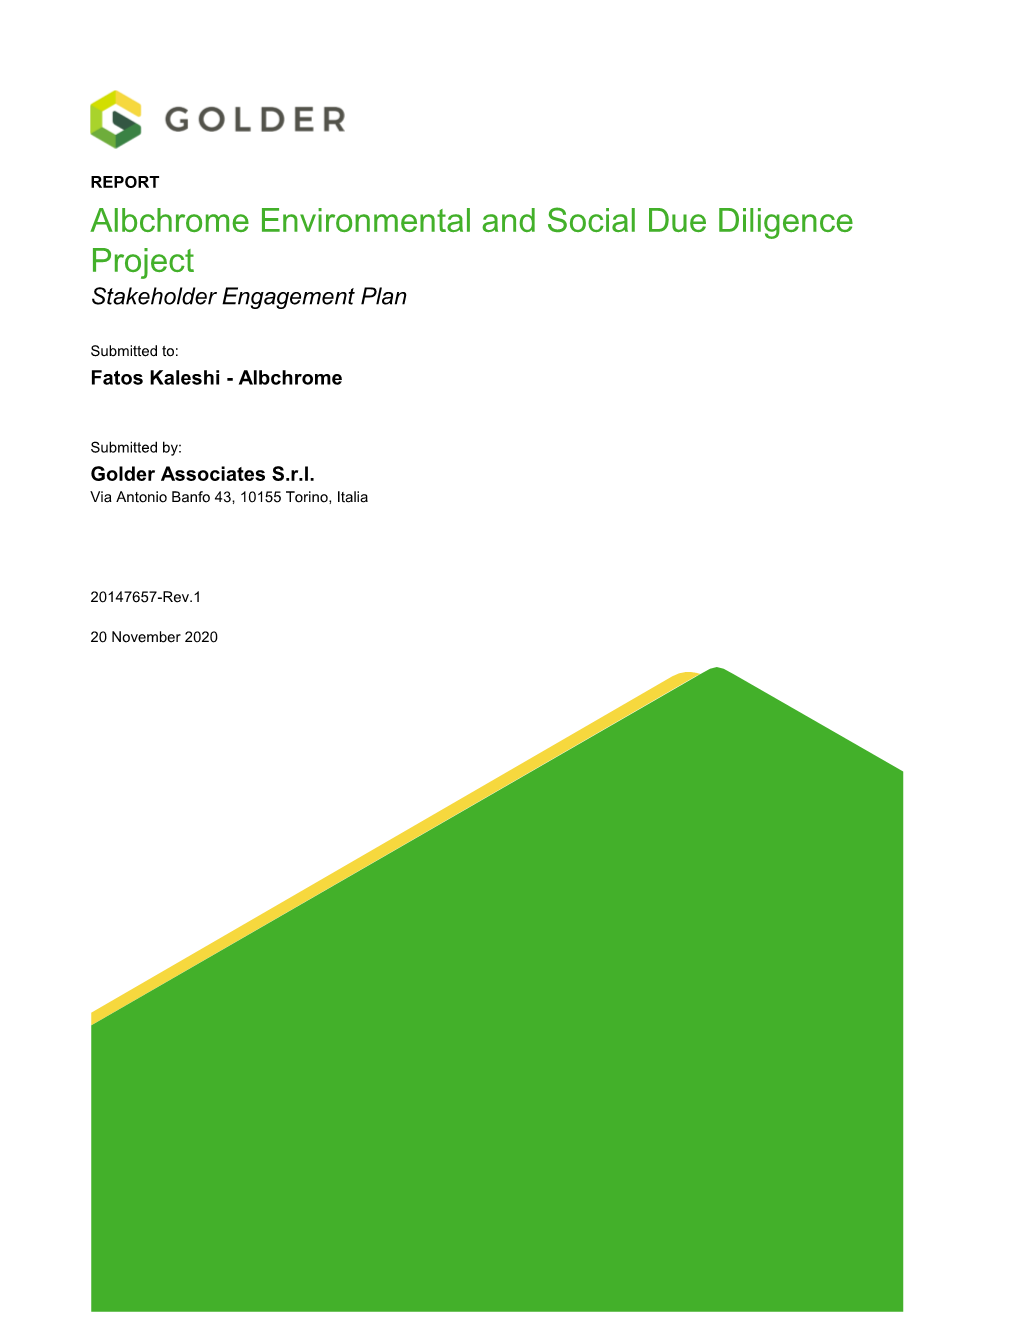 Albchrome Environmental and Social Due Diligence Project Stakeholder Engagement Plan